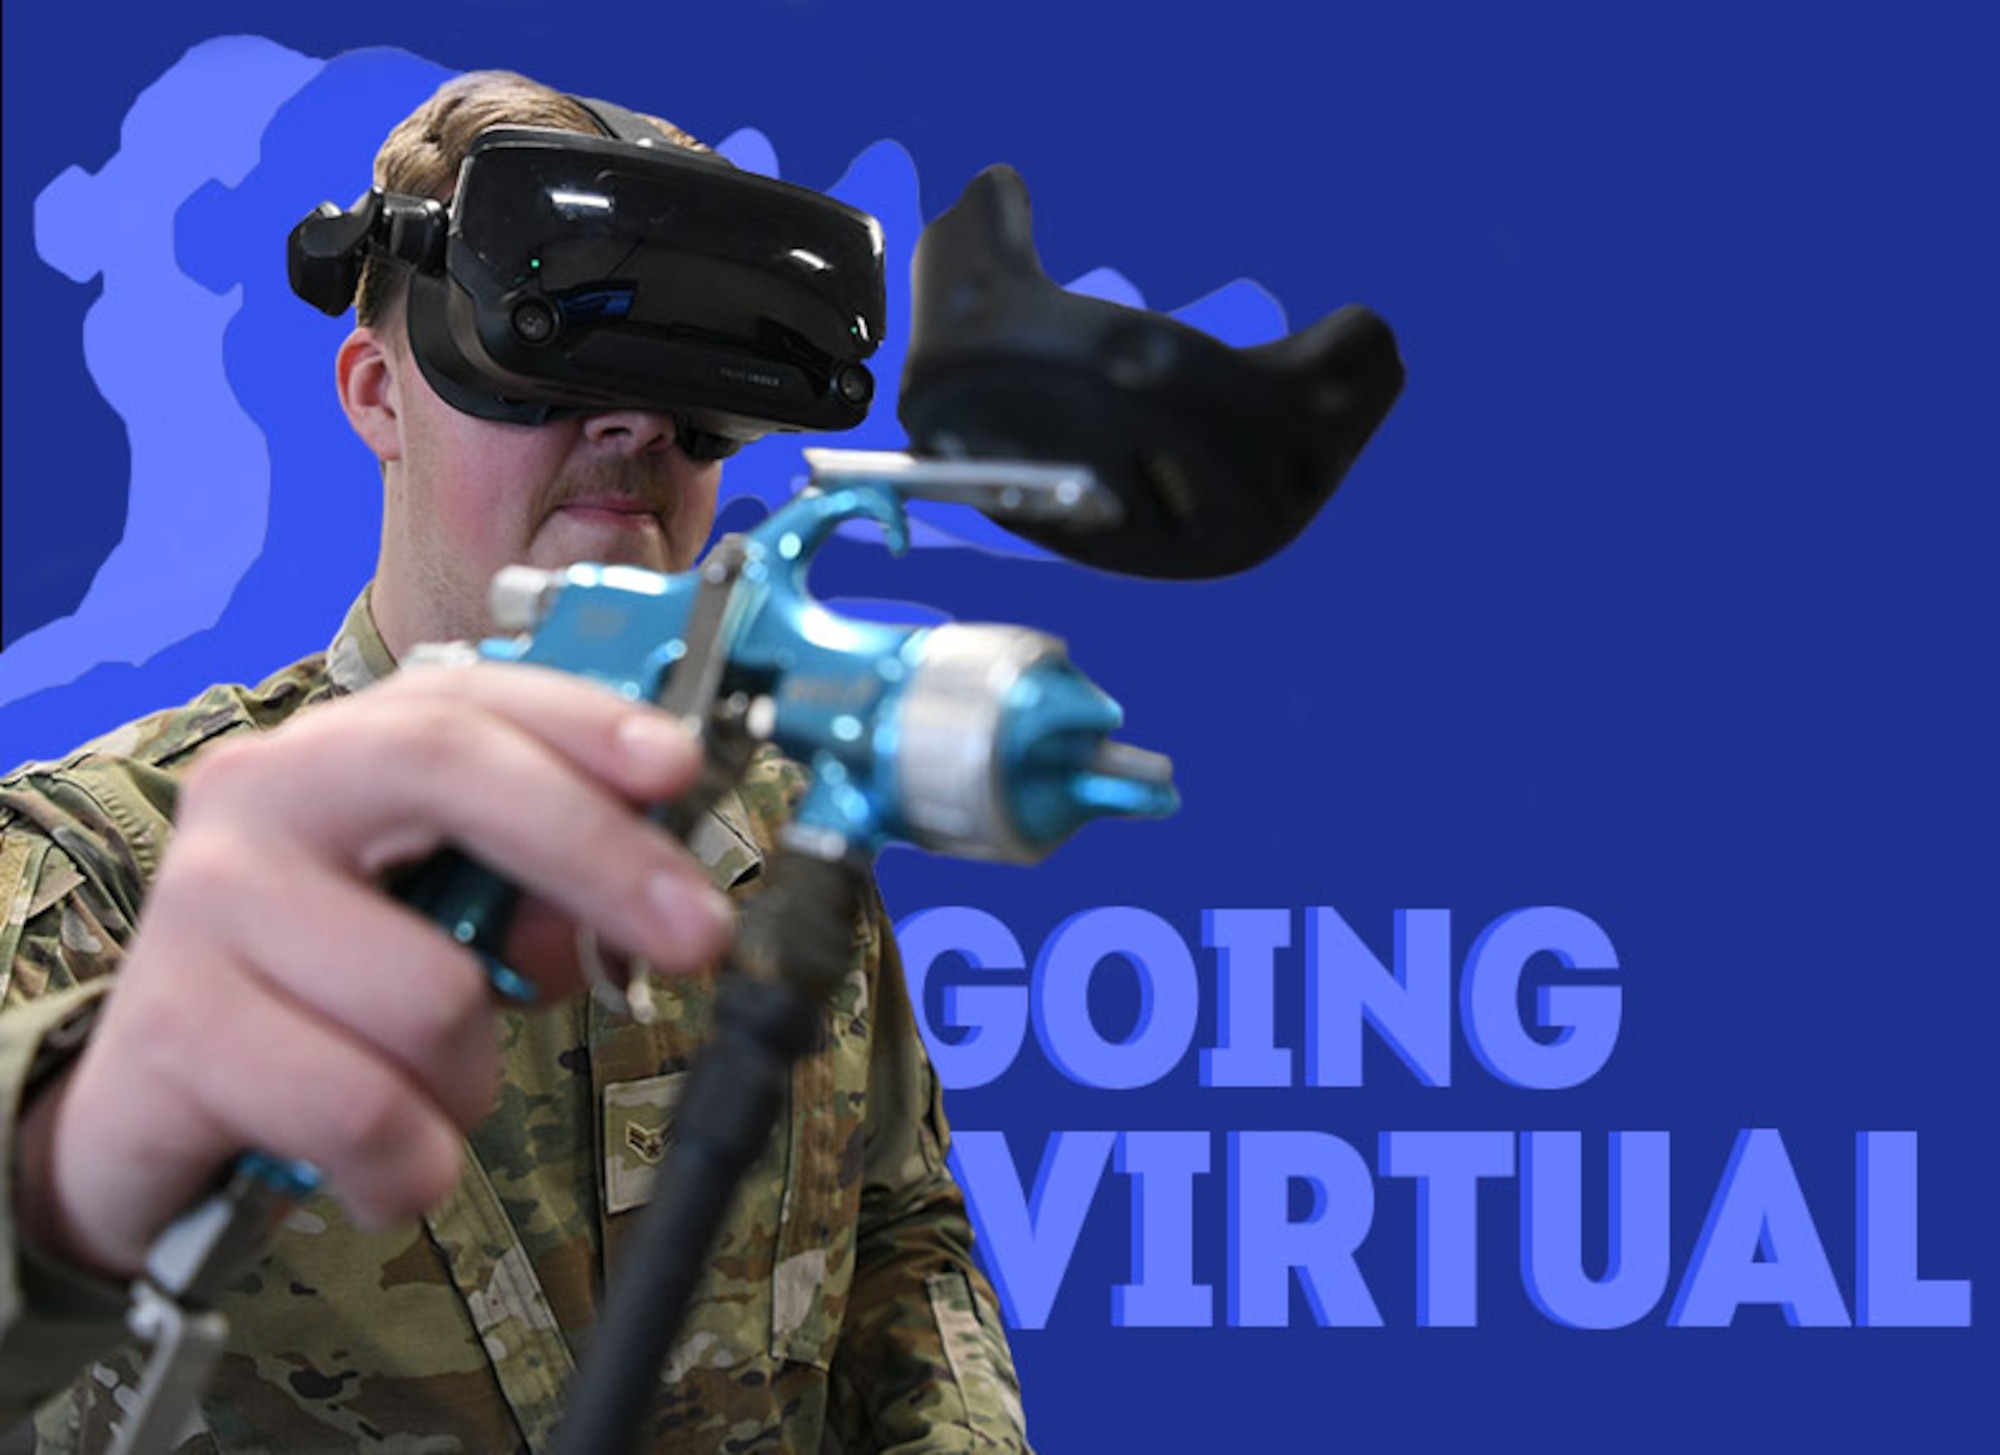 An Airman stands with a painting gun on a blue background with the text 'going virtual' to viewer's right.